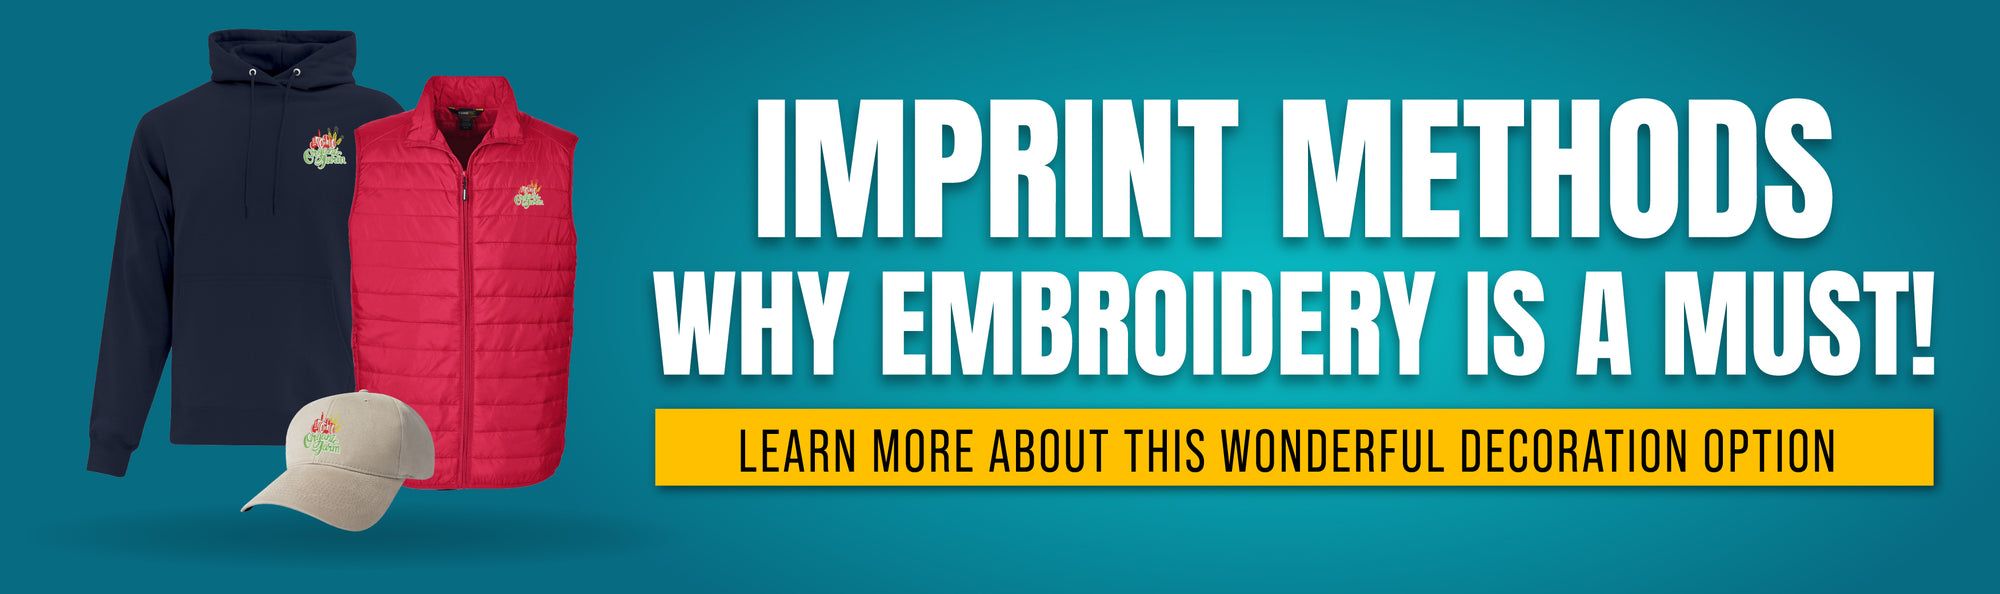 Imprint Methods | Why Embroidery is a Must!